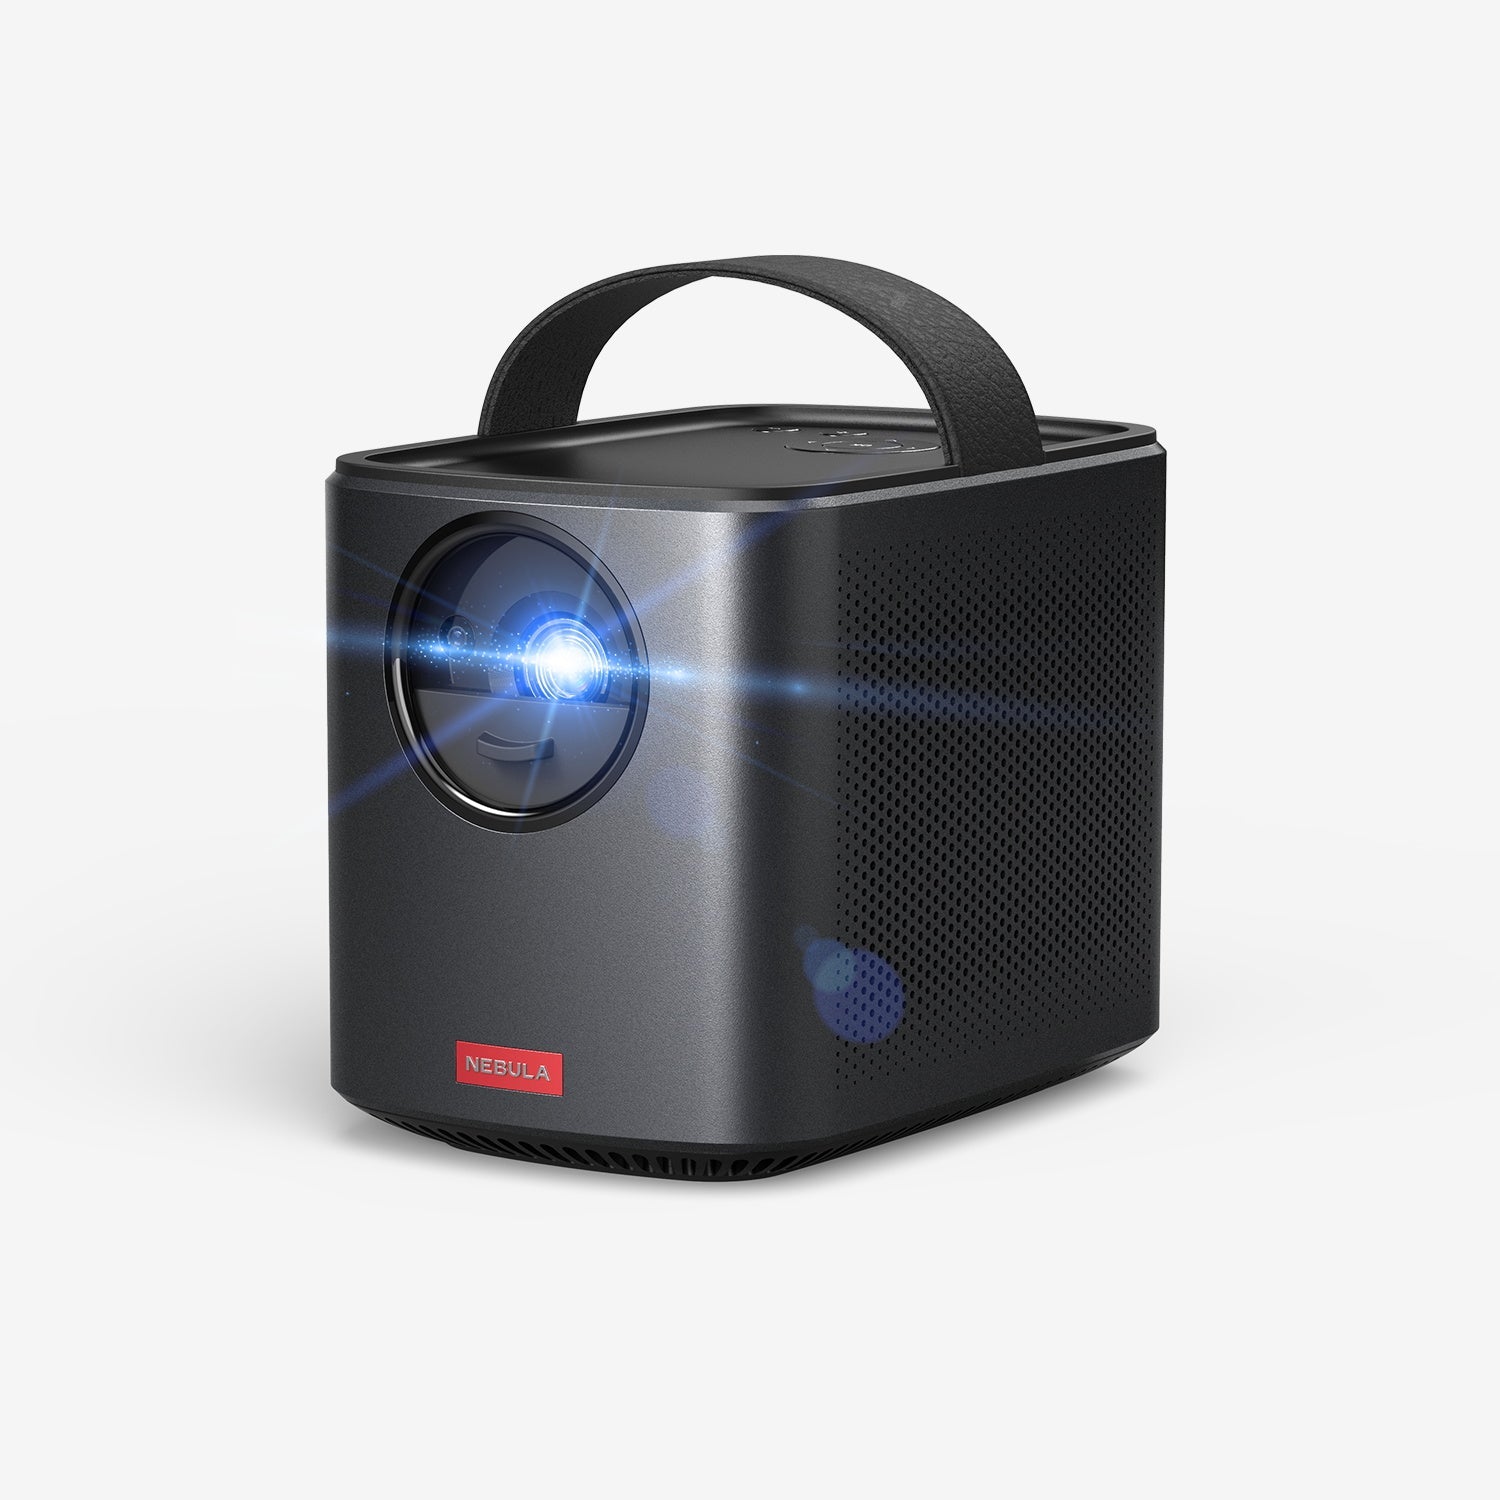 Recertified - Nebula by Anker Mars II Pro 500 ANSI Lumen Portable Projector, Black, 720P Image, Video Projector, 30 to 150 inch Image TV projector.